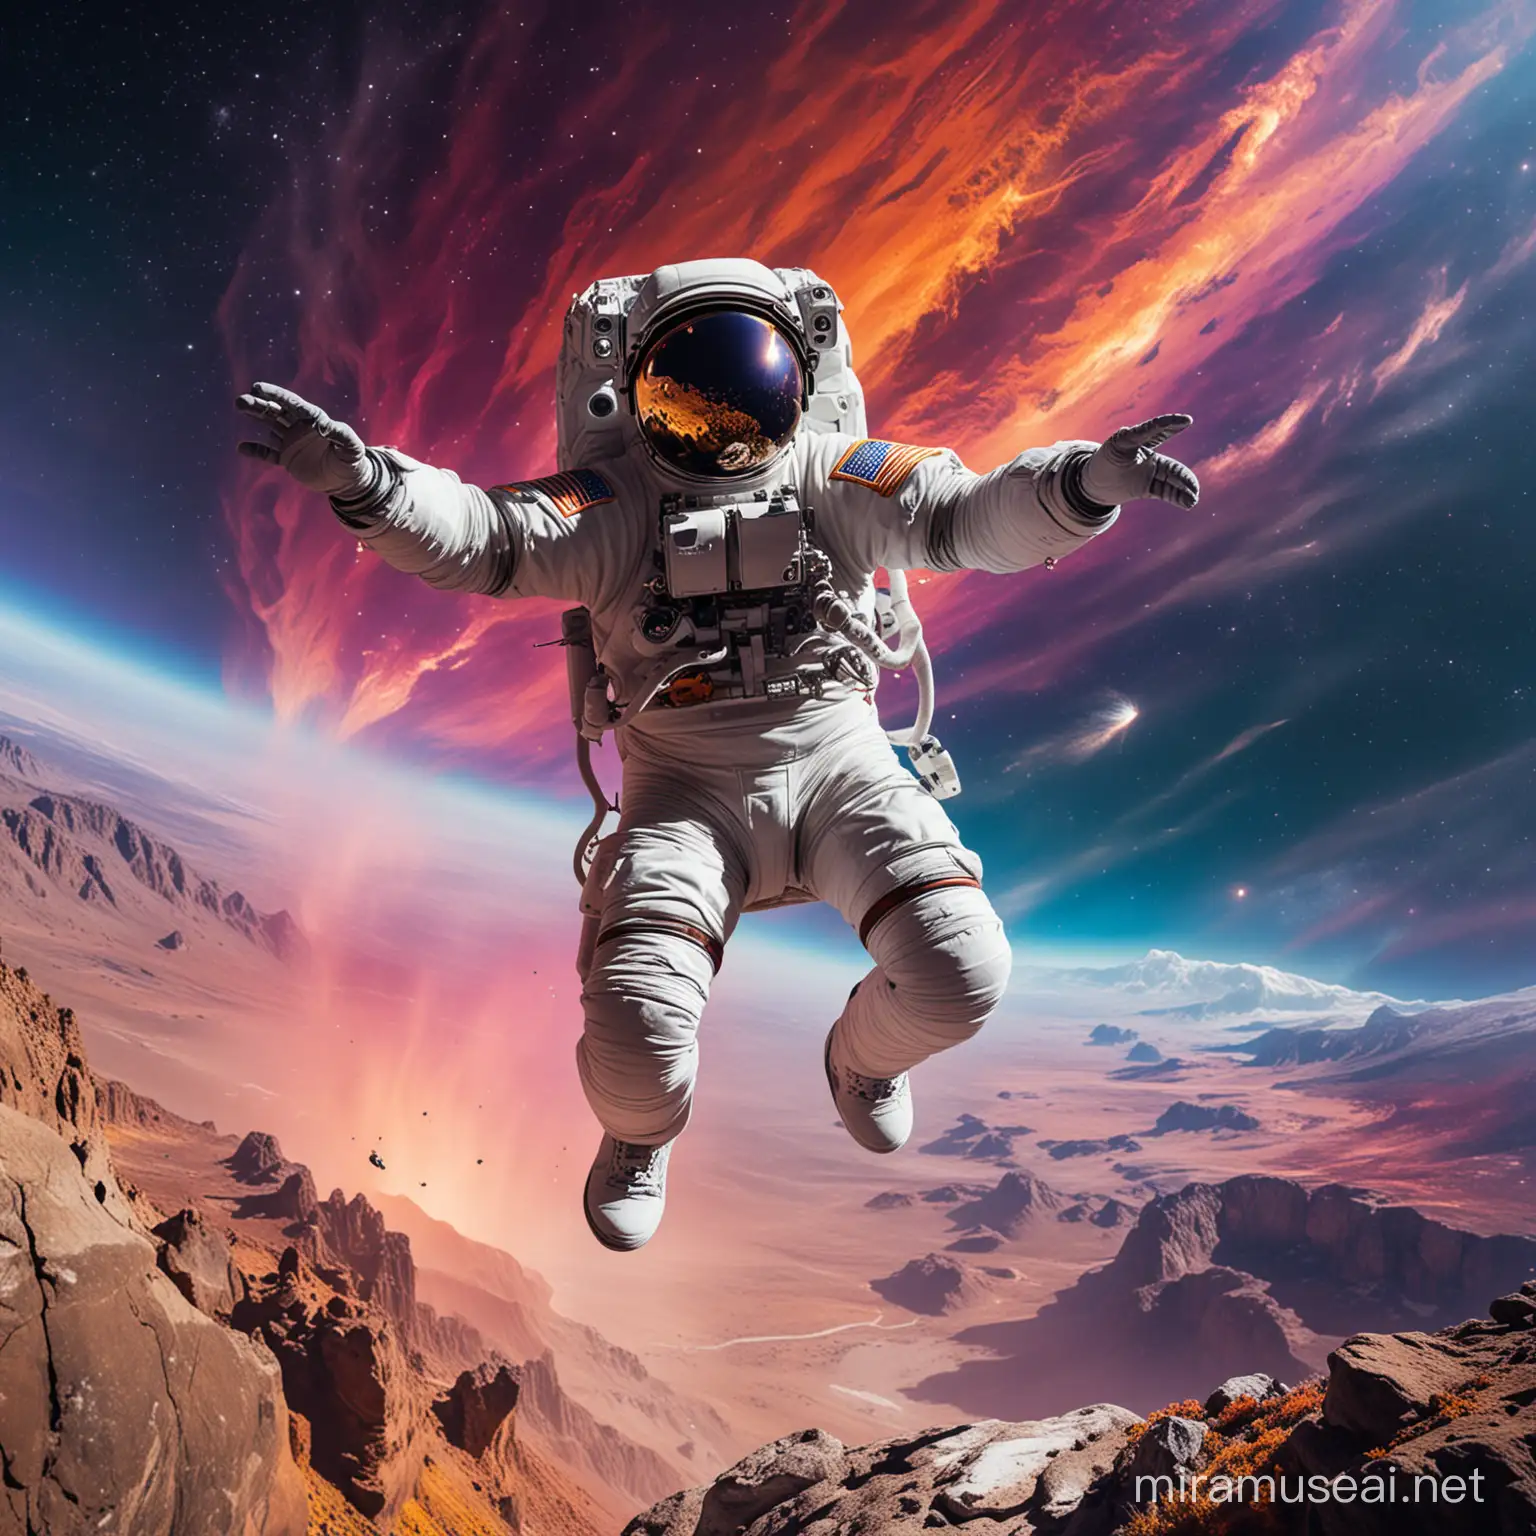 an astronaut in space, space jumping, in a colorful atmosphere, Rocky mountain area